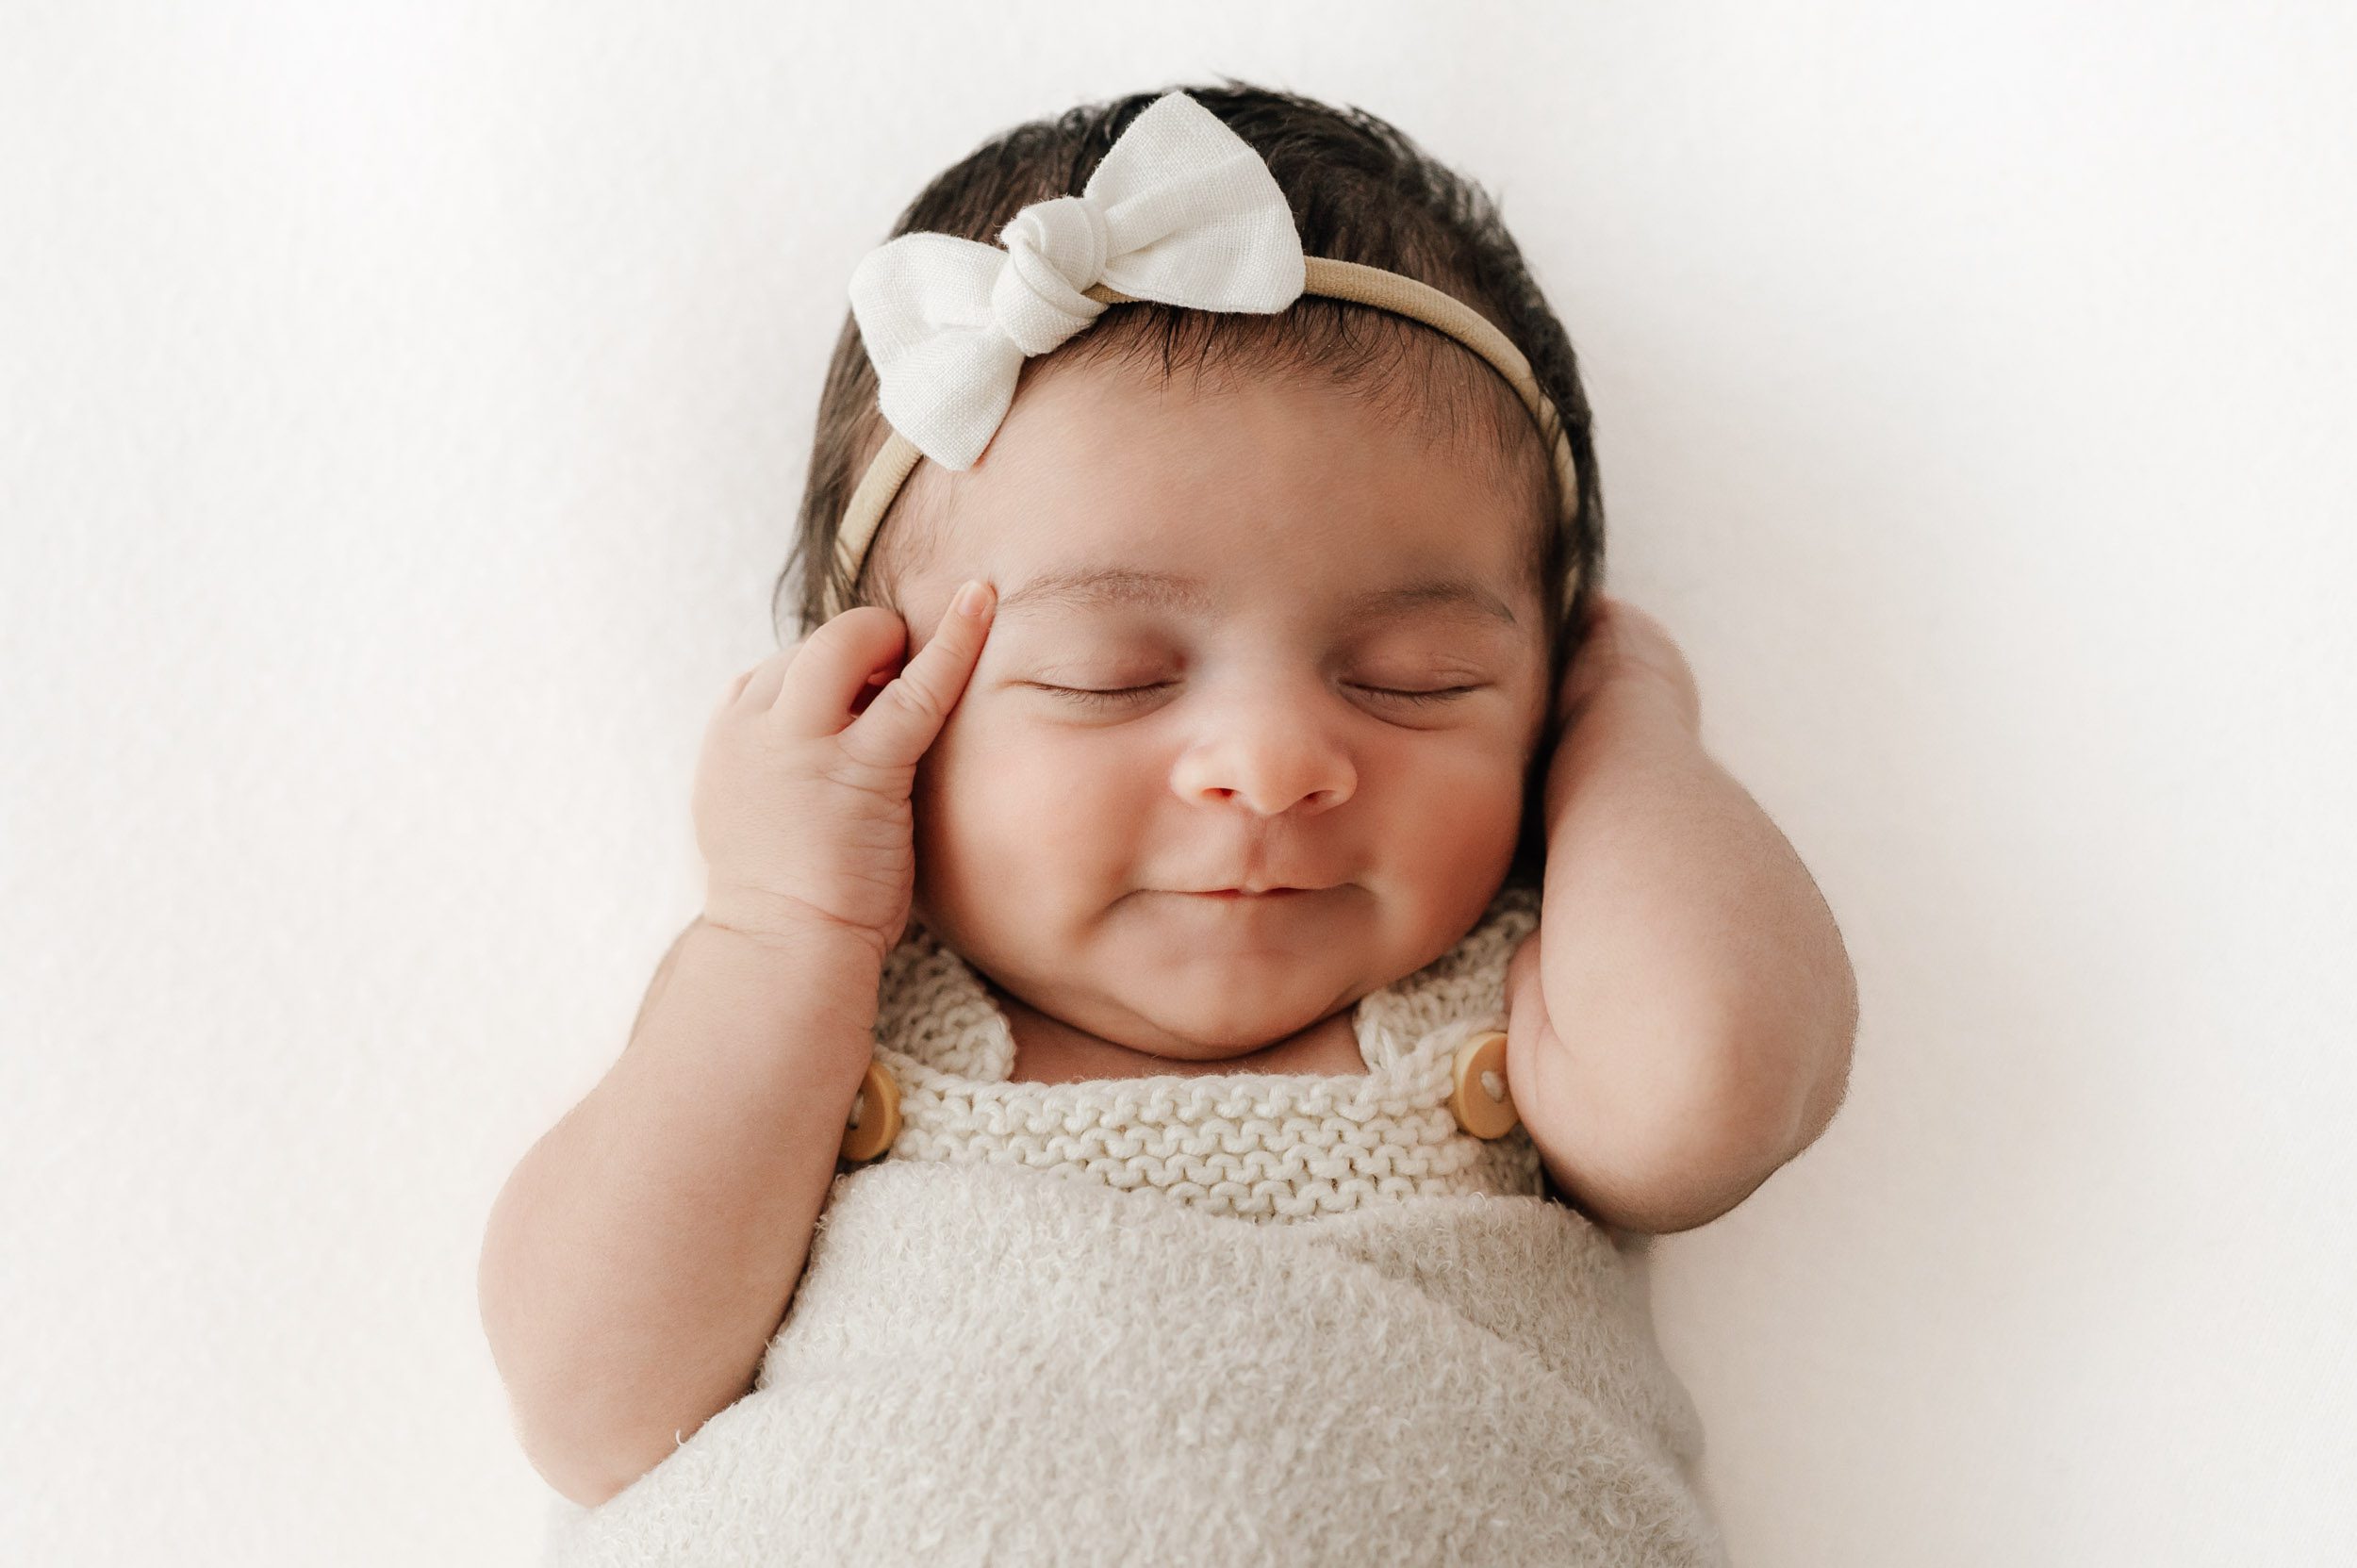 a newborn baby girl wrapped in a fuzzy swaddle blanket sleeping on a white backdrop as she holds her hands up to her cheeks with a hint of a smile on her face during a natural light newborn photo session